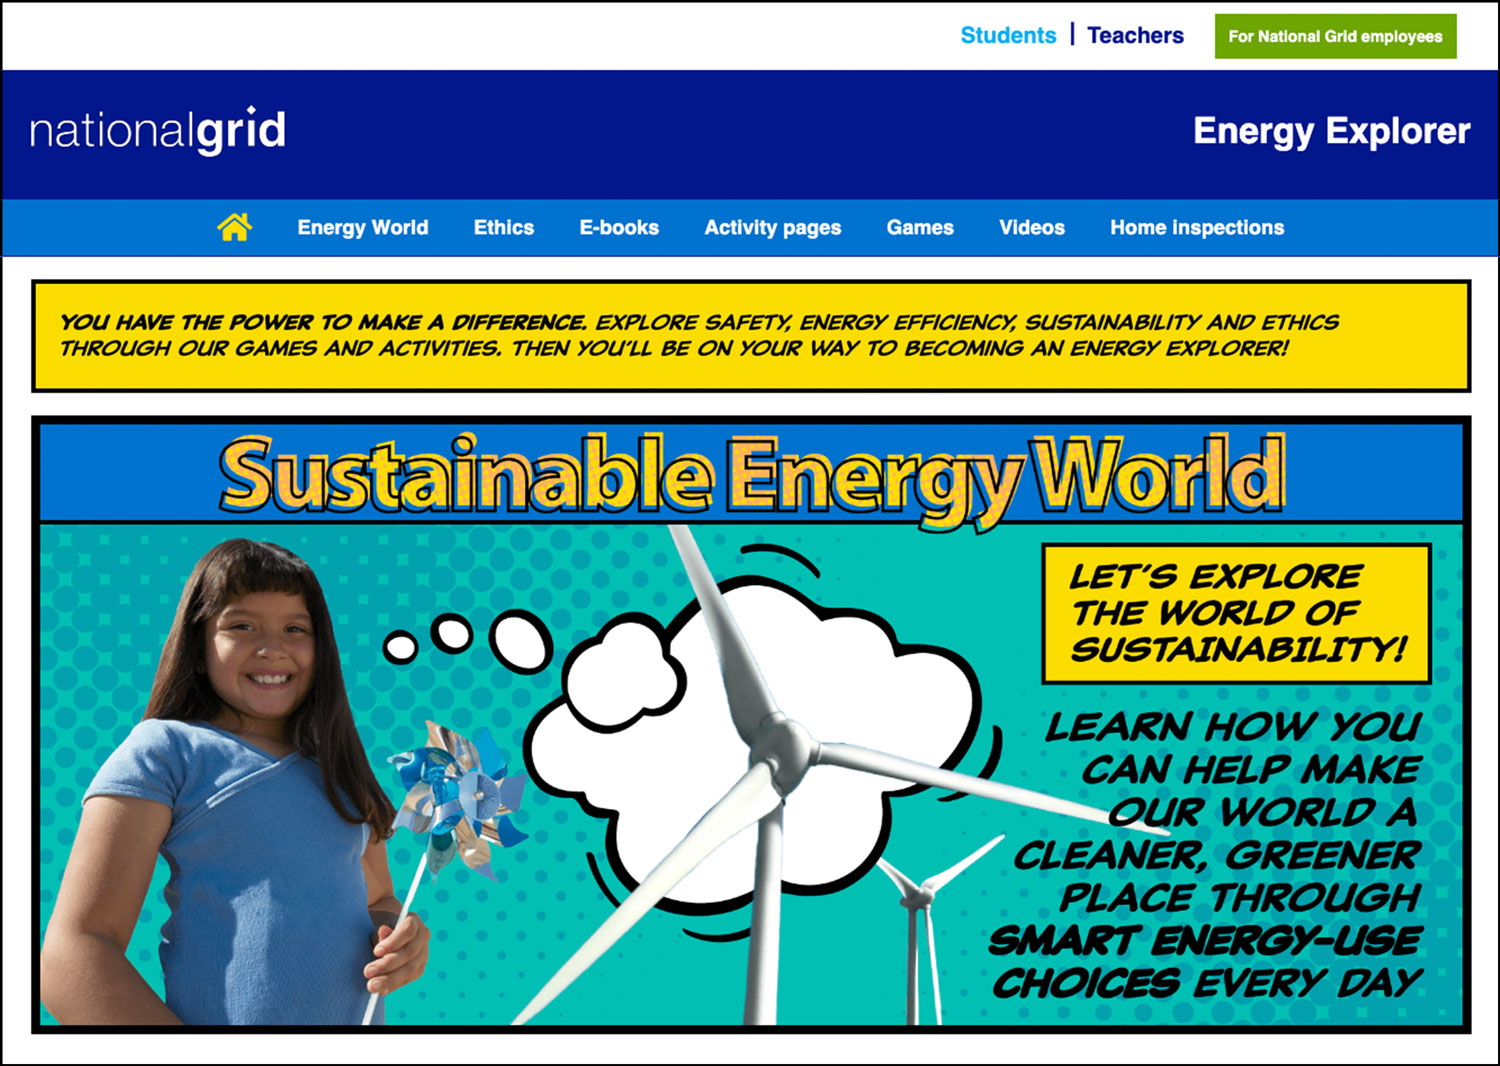 Energy Explorer website homepage with Sustainable Energy World banner